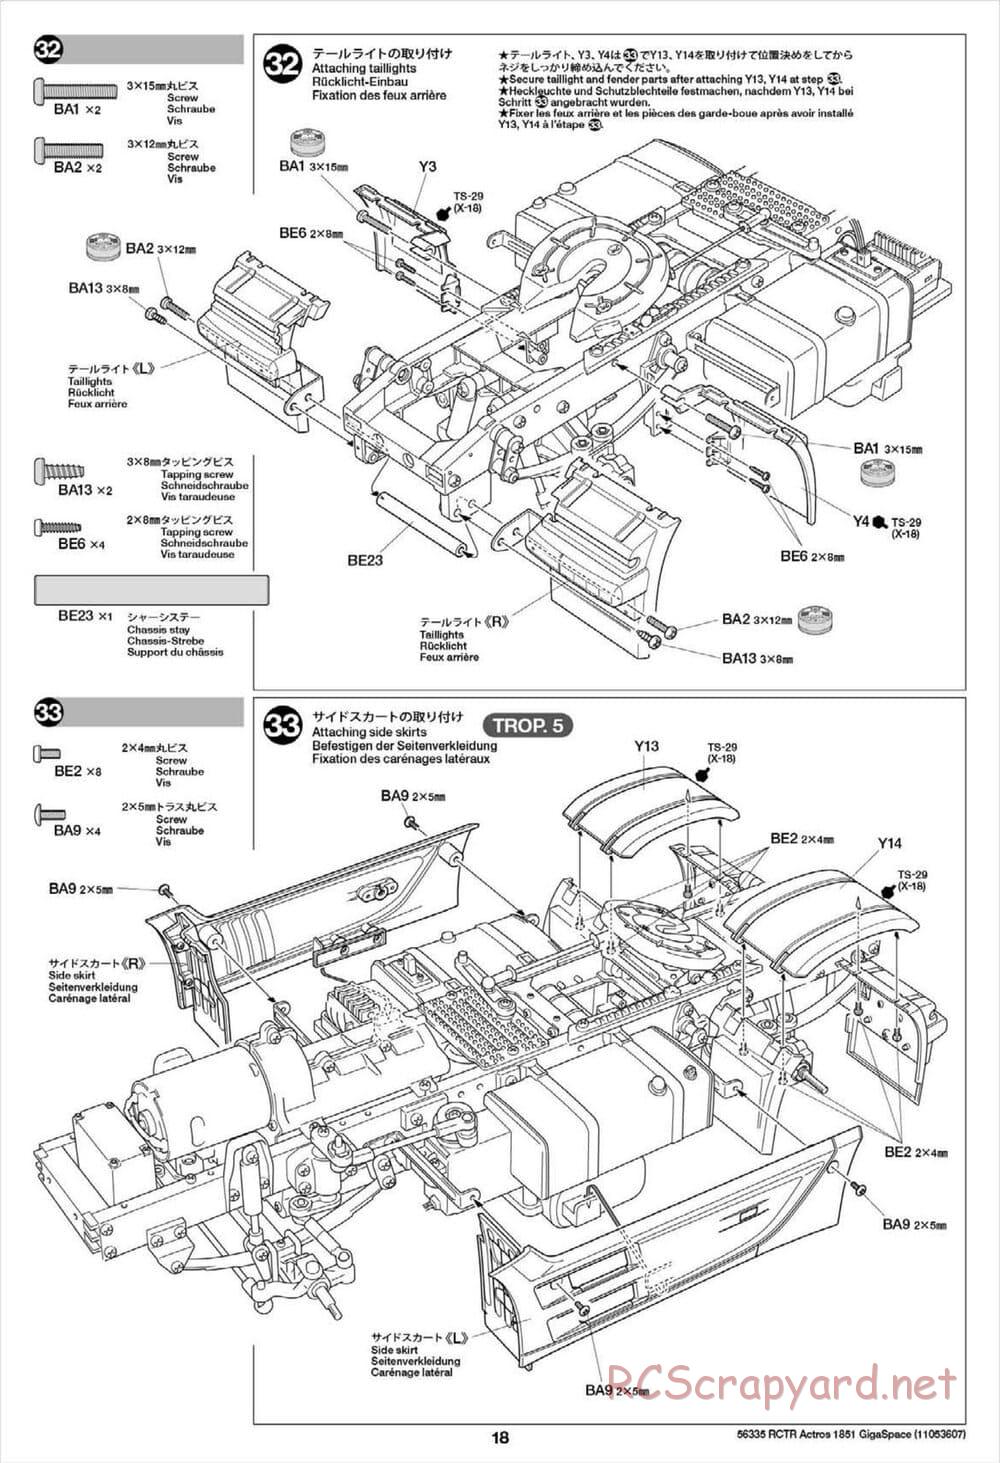 Tamiya - Mercedes-Benz Actros 1851 Gigaspace Tractor Truck Chassis - Manual - Page 18